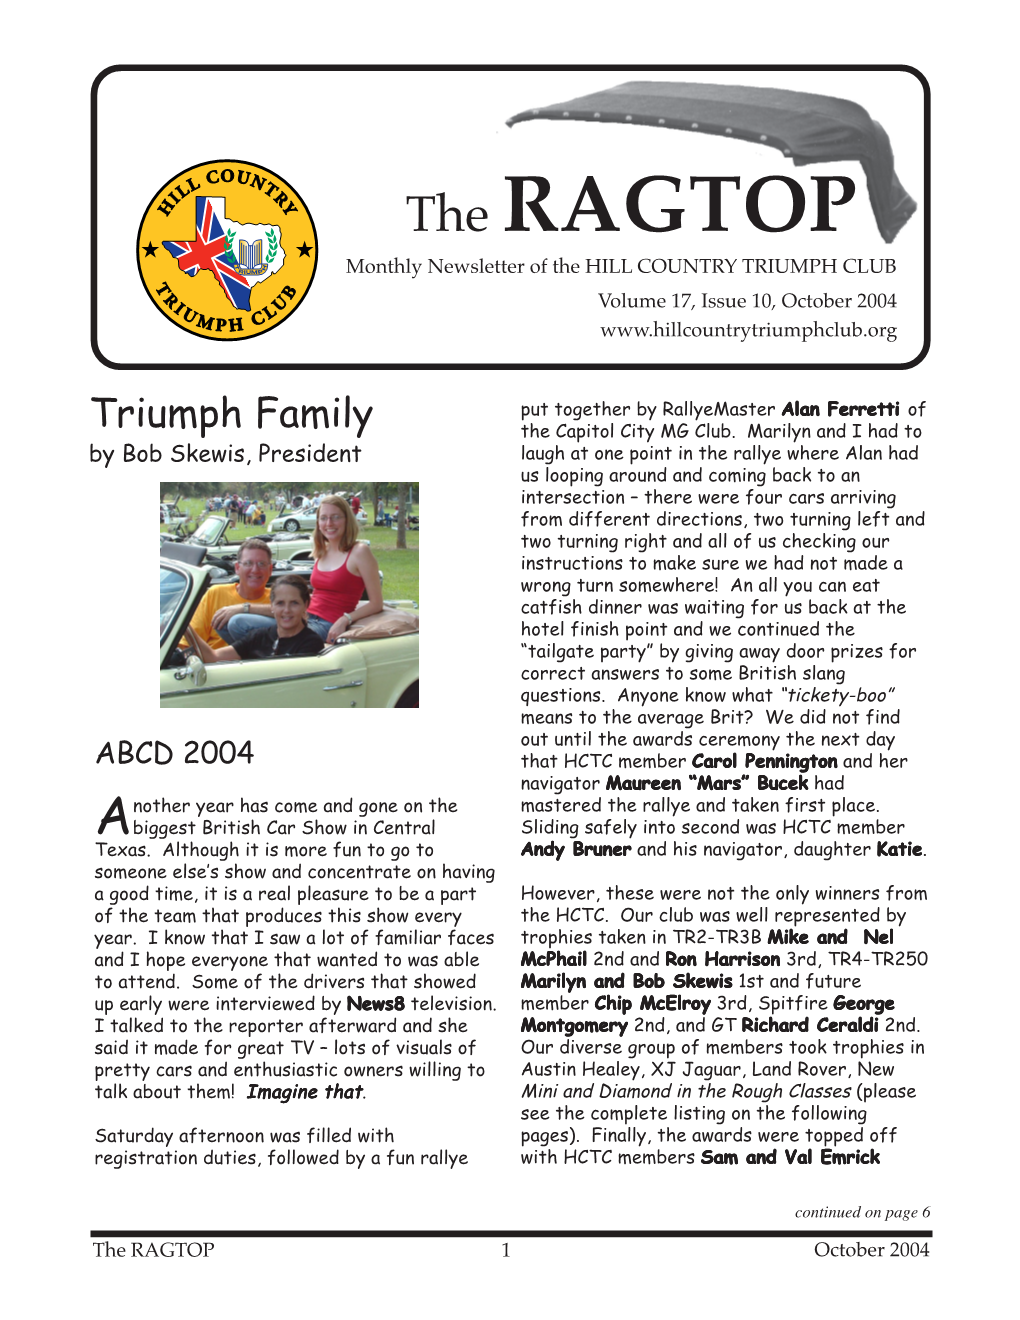 The RAGTOP Monthly Newsletter of the HILL COUNTRY TRIUMPH CLUB Volume 17, Issue 10, October 2004